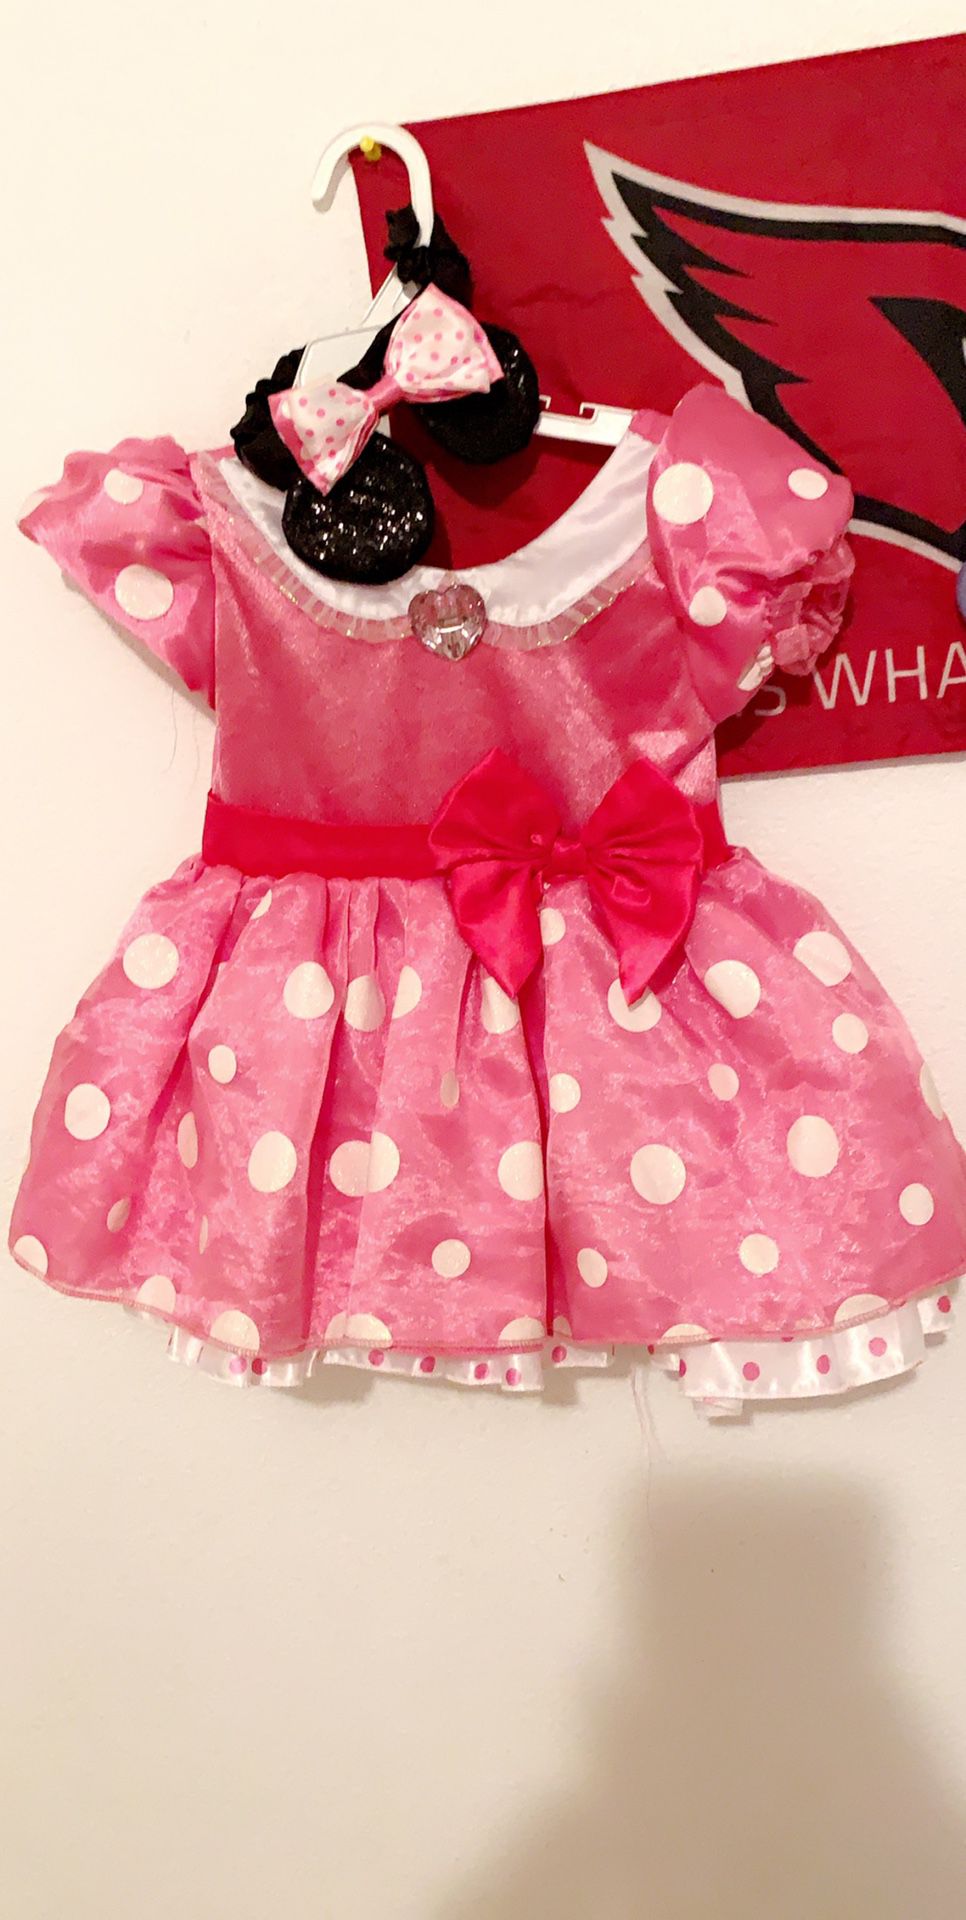 Minnie mouse 18-24 months includes ears